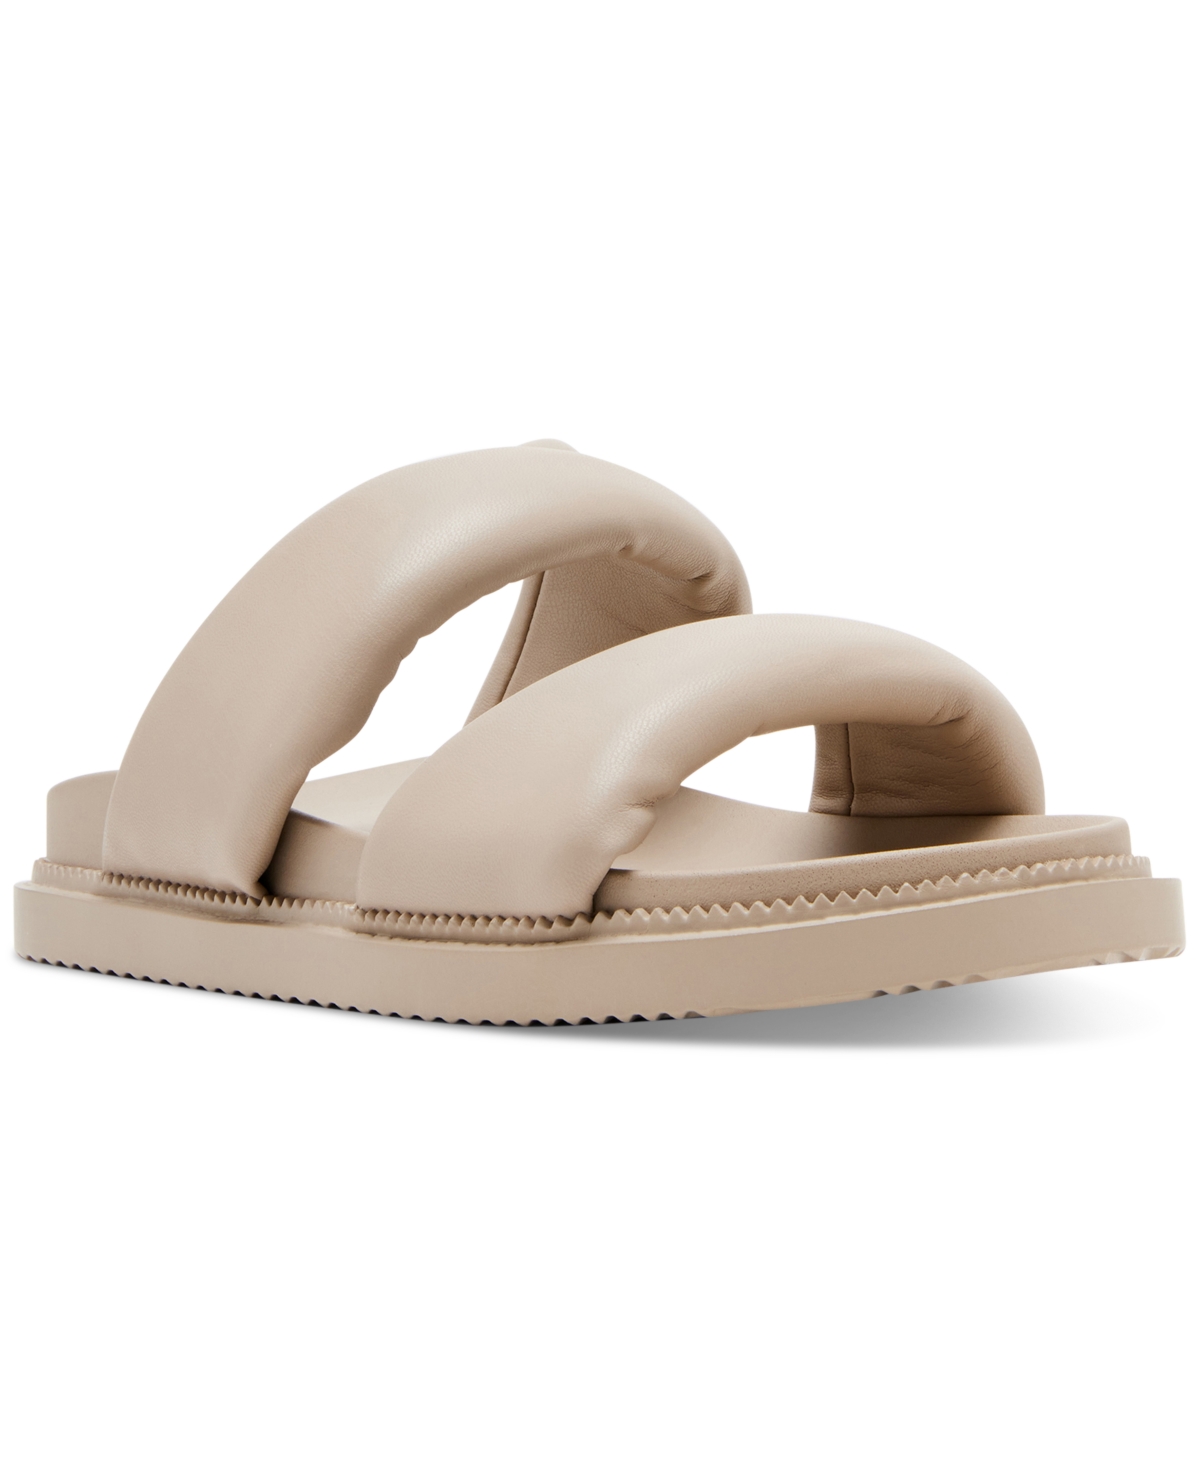 Madden Girl Minnie Footbed Slide Sandals In Taupe